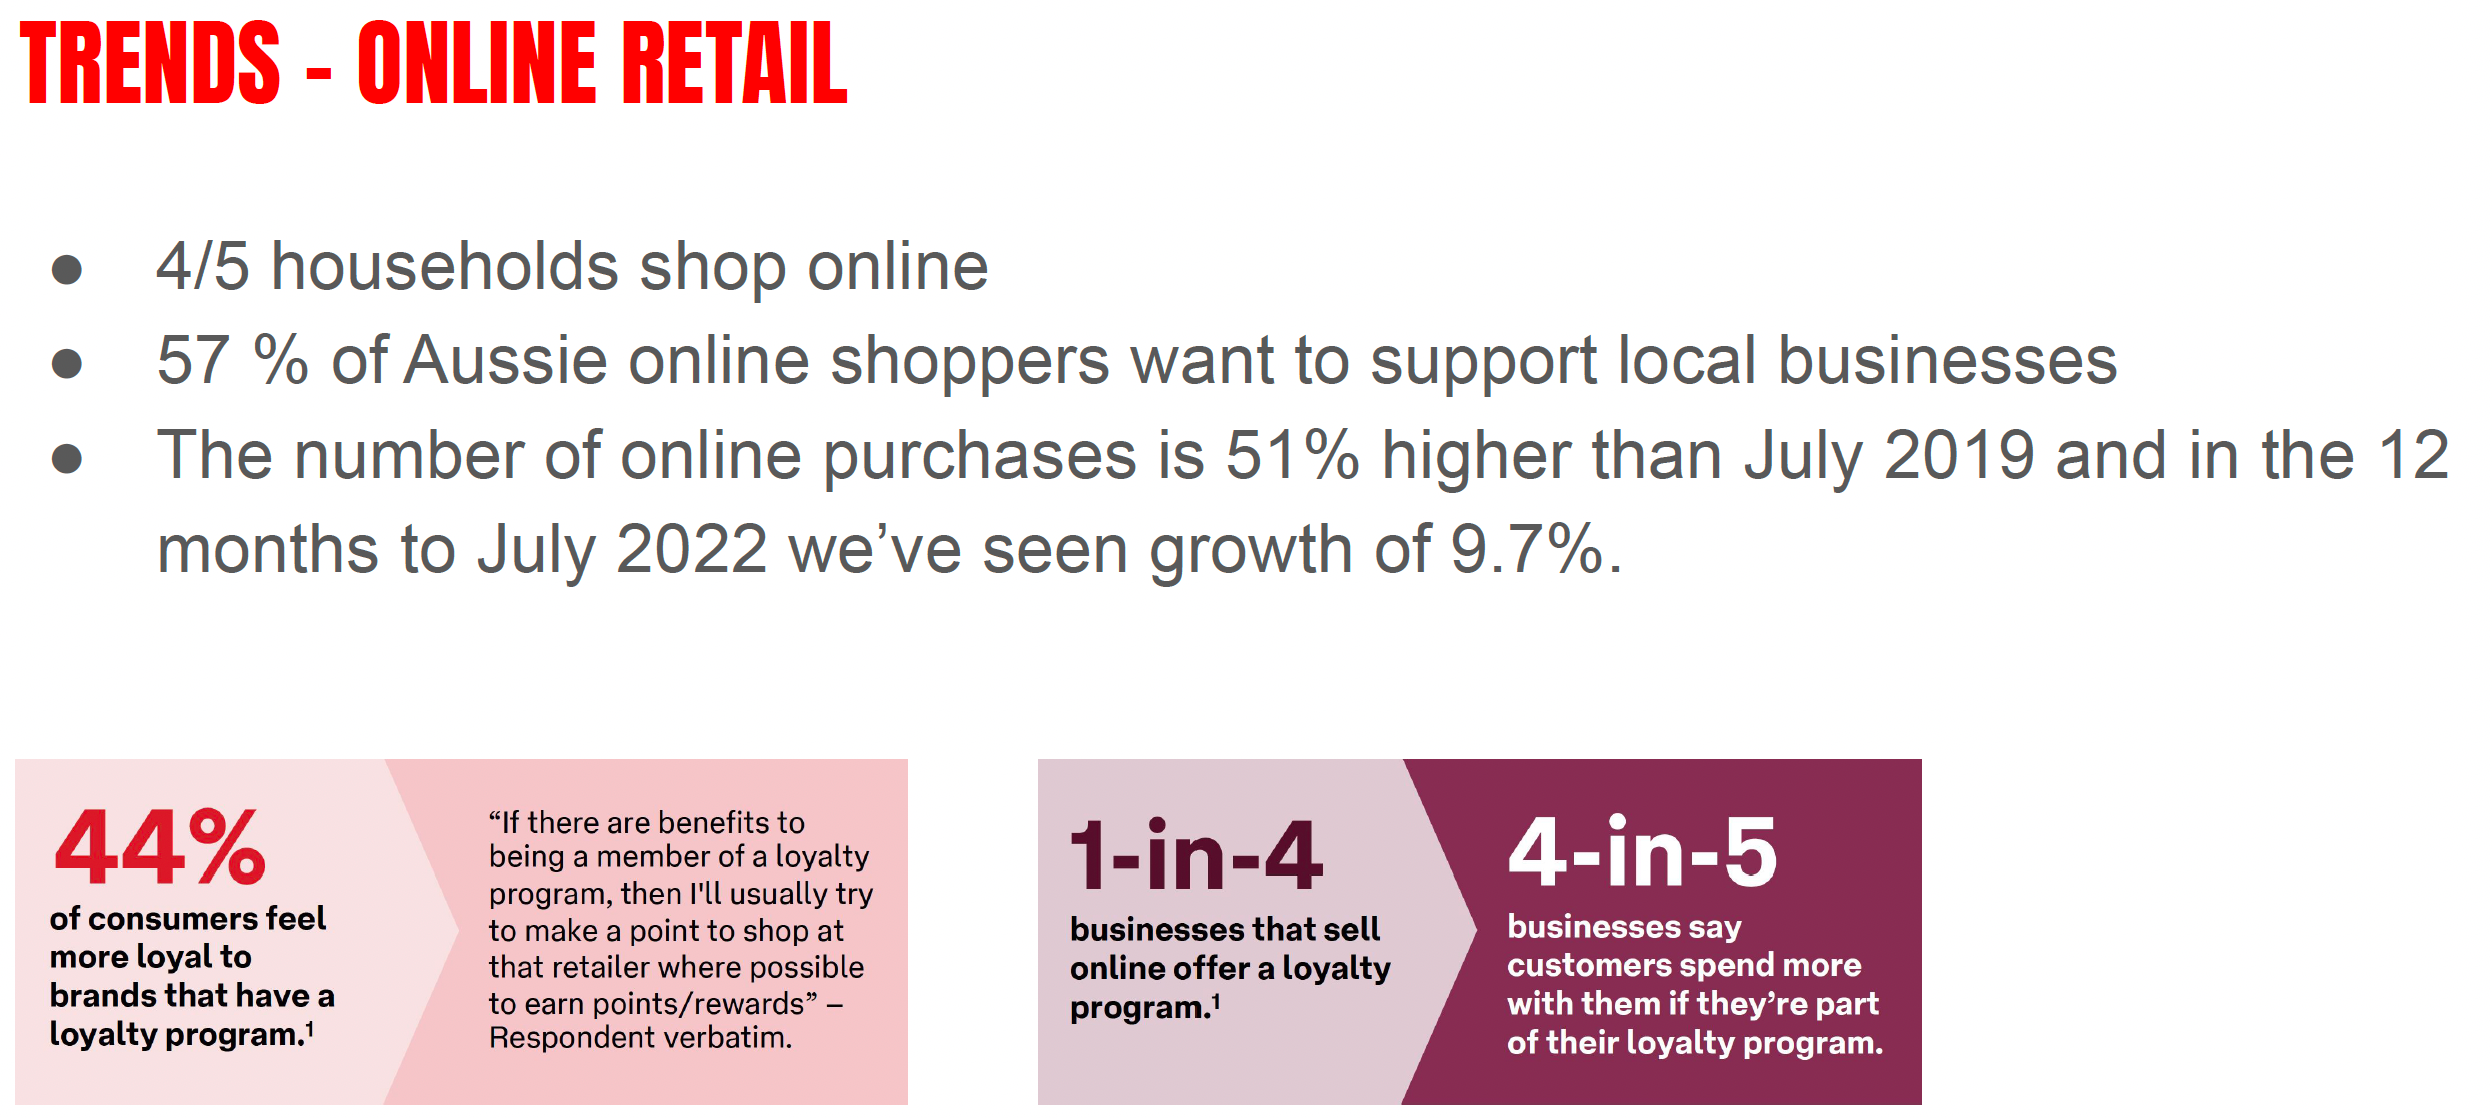 Ternds online retail infographic